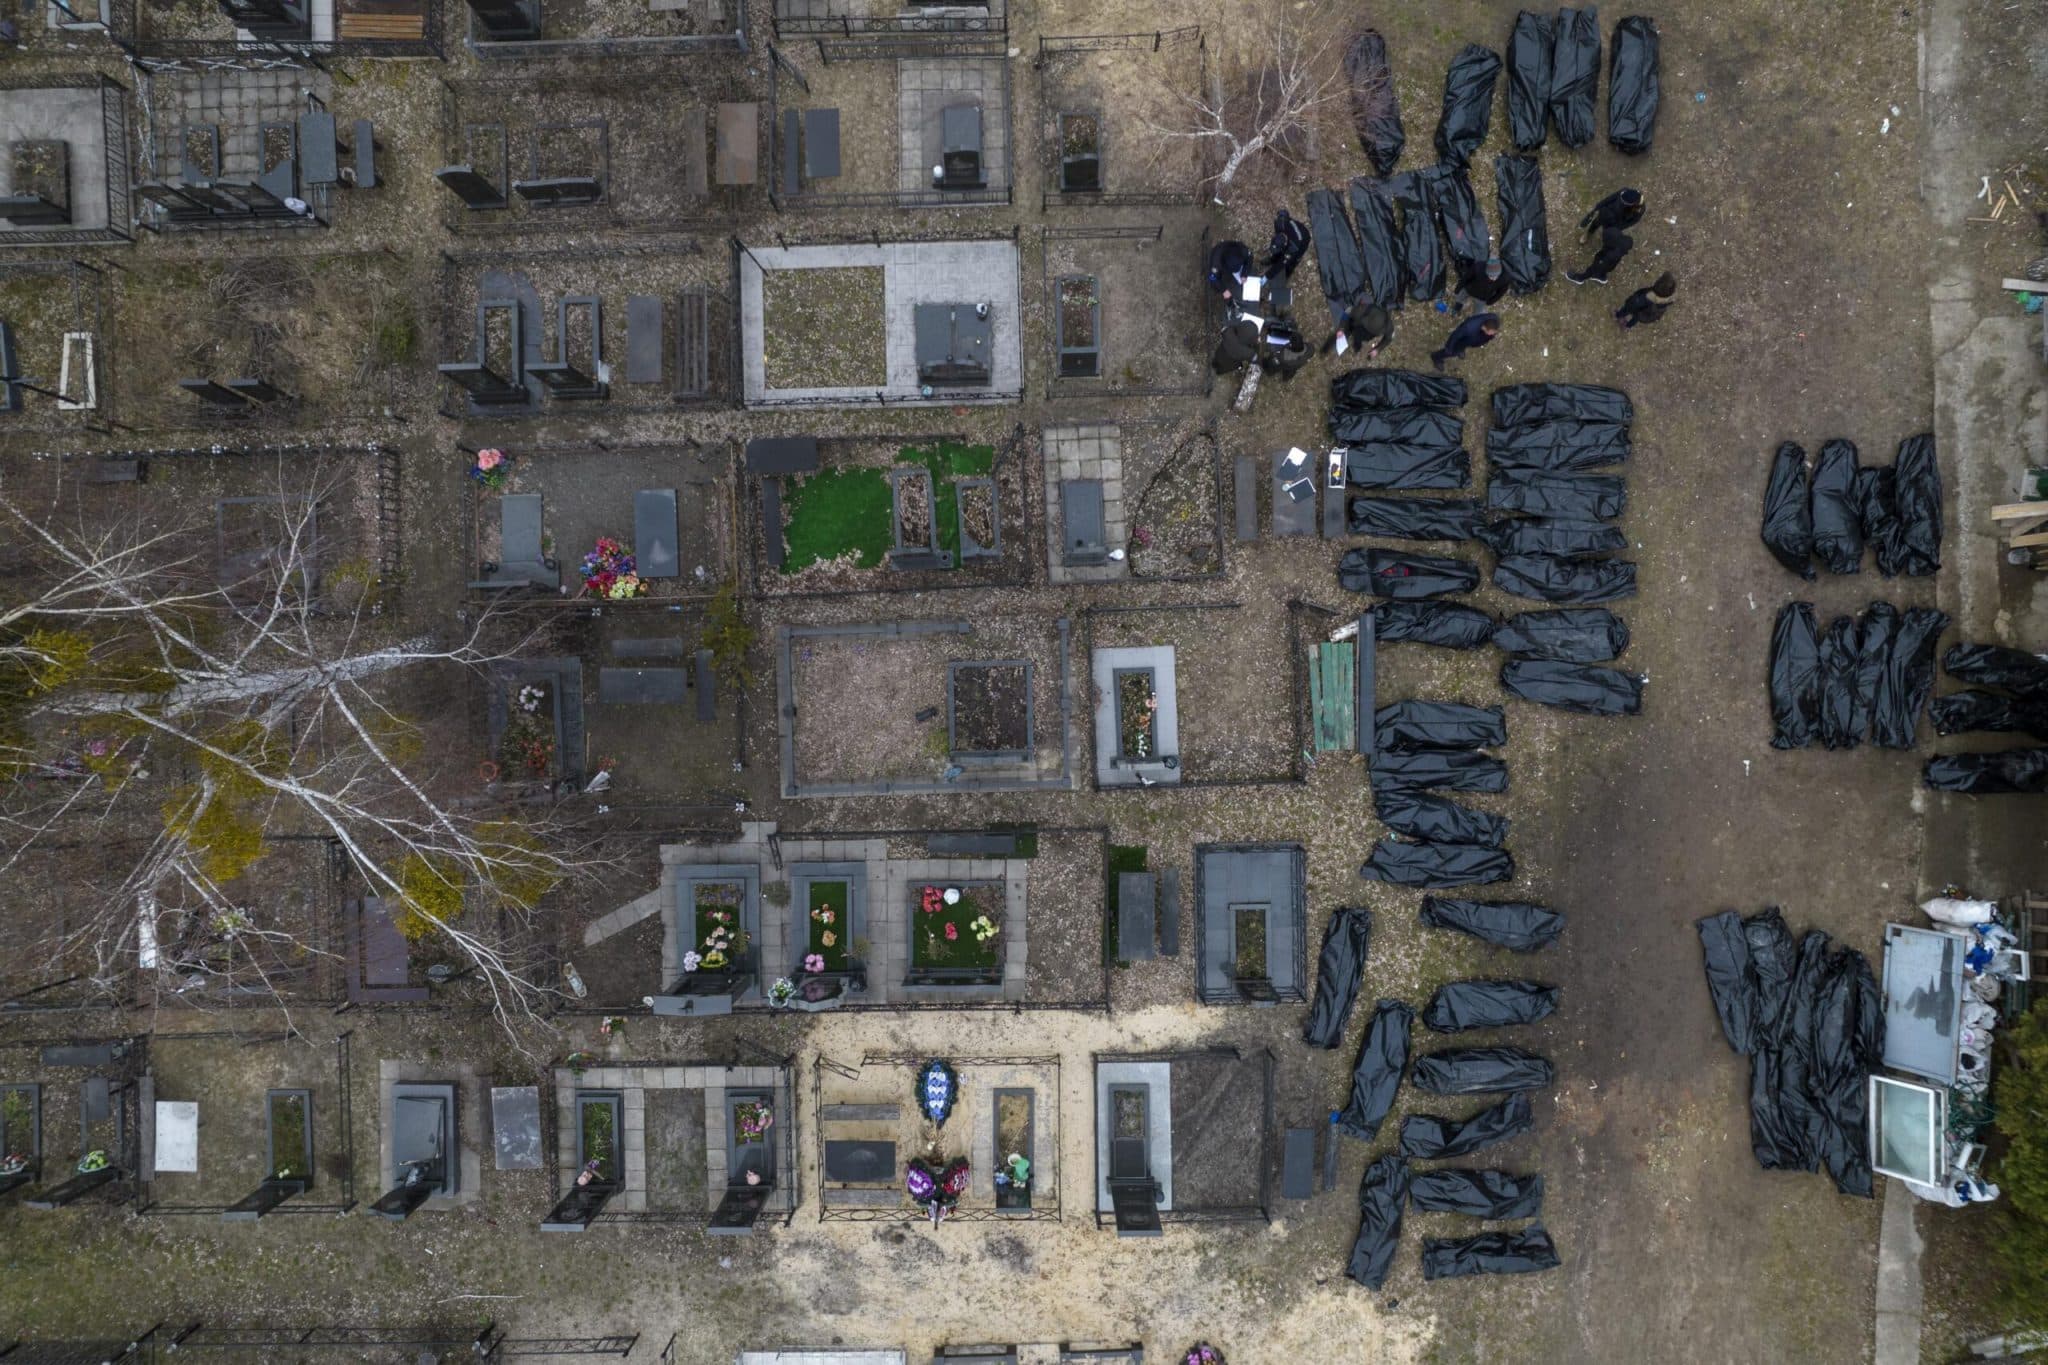 Mariupol’s dead put at 5,000 as Ukraine braces in the east